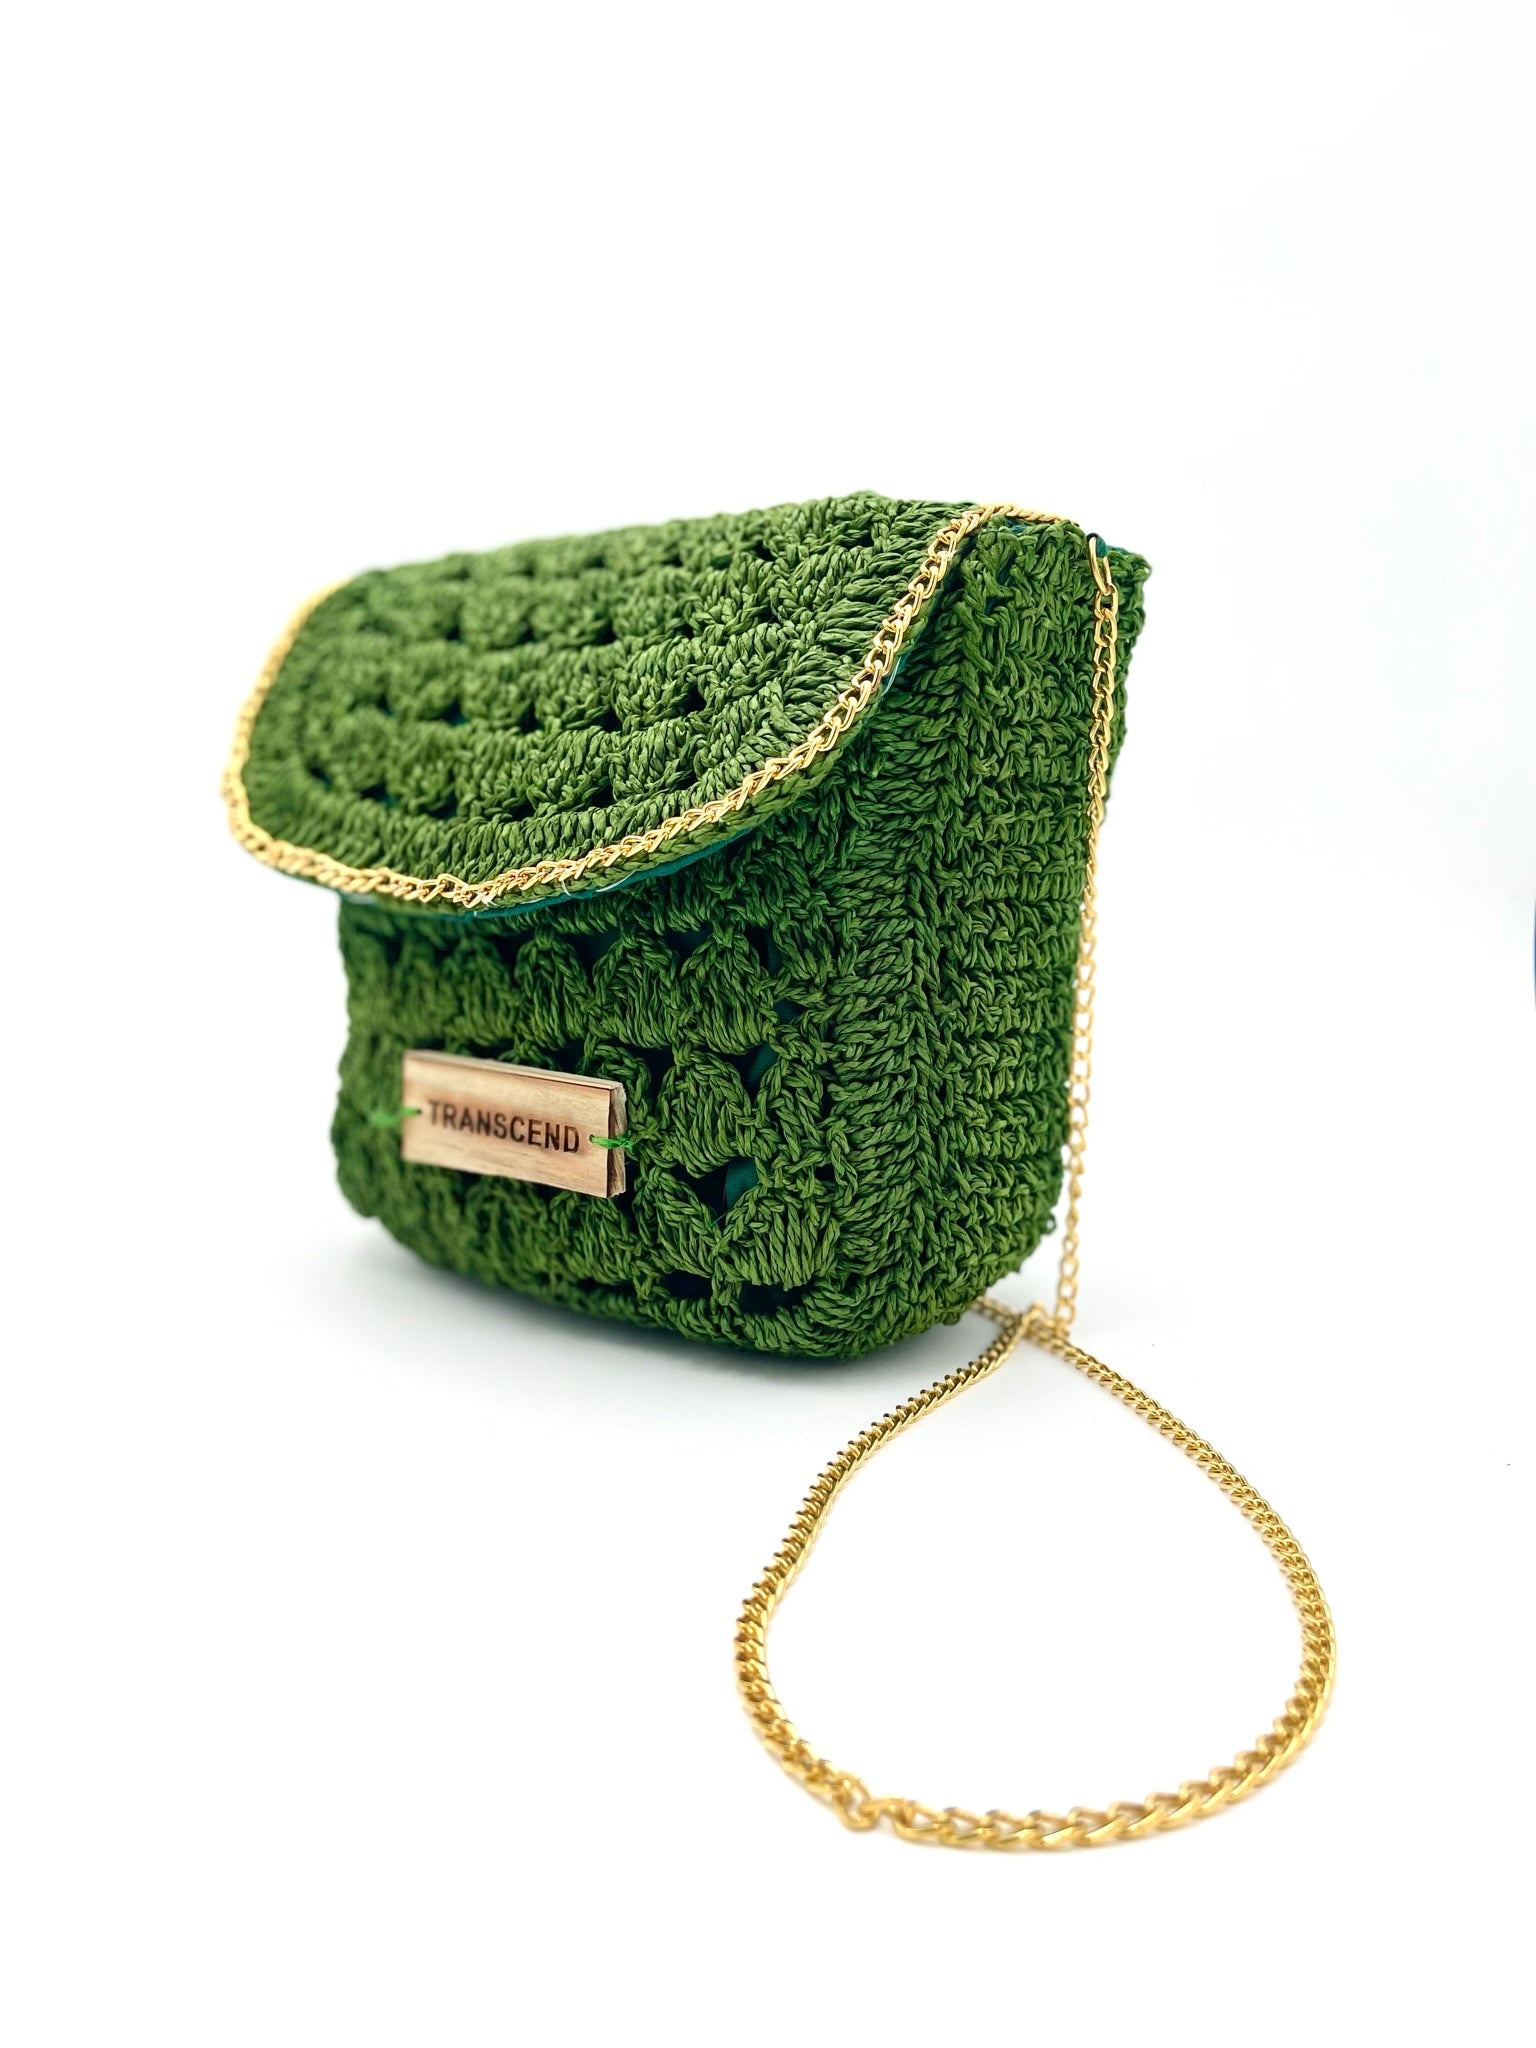 Women’s Handwoven Natural Raffia Flap Bag / Crossbody In Blue & Green Colors - Green One Size Transcend